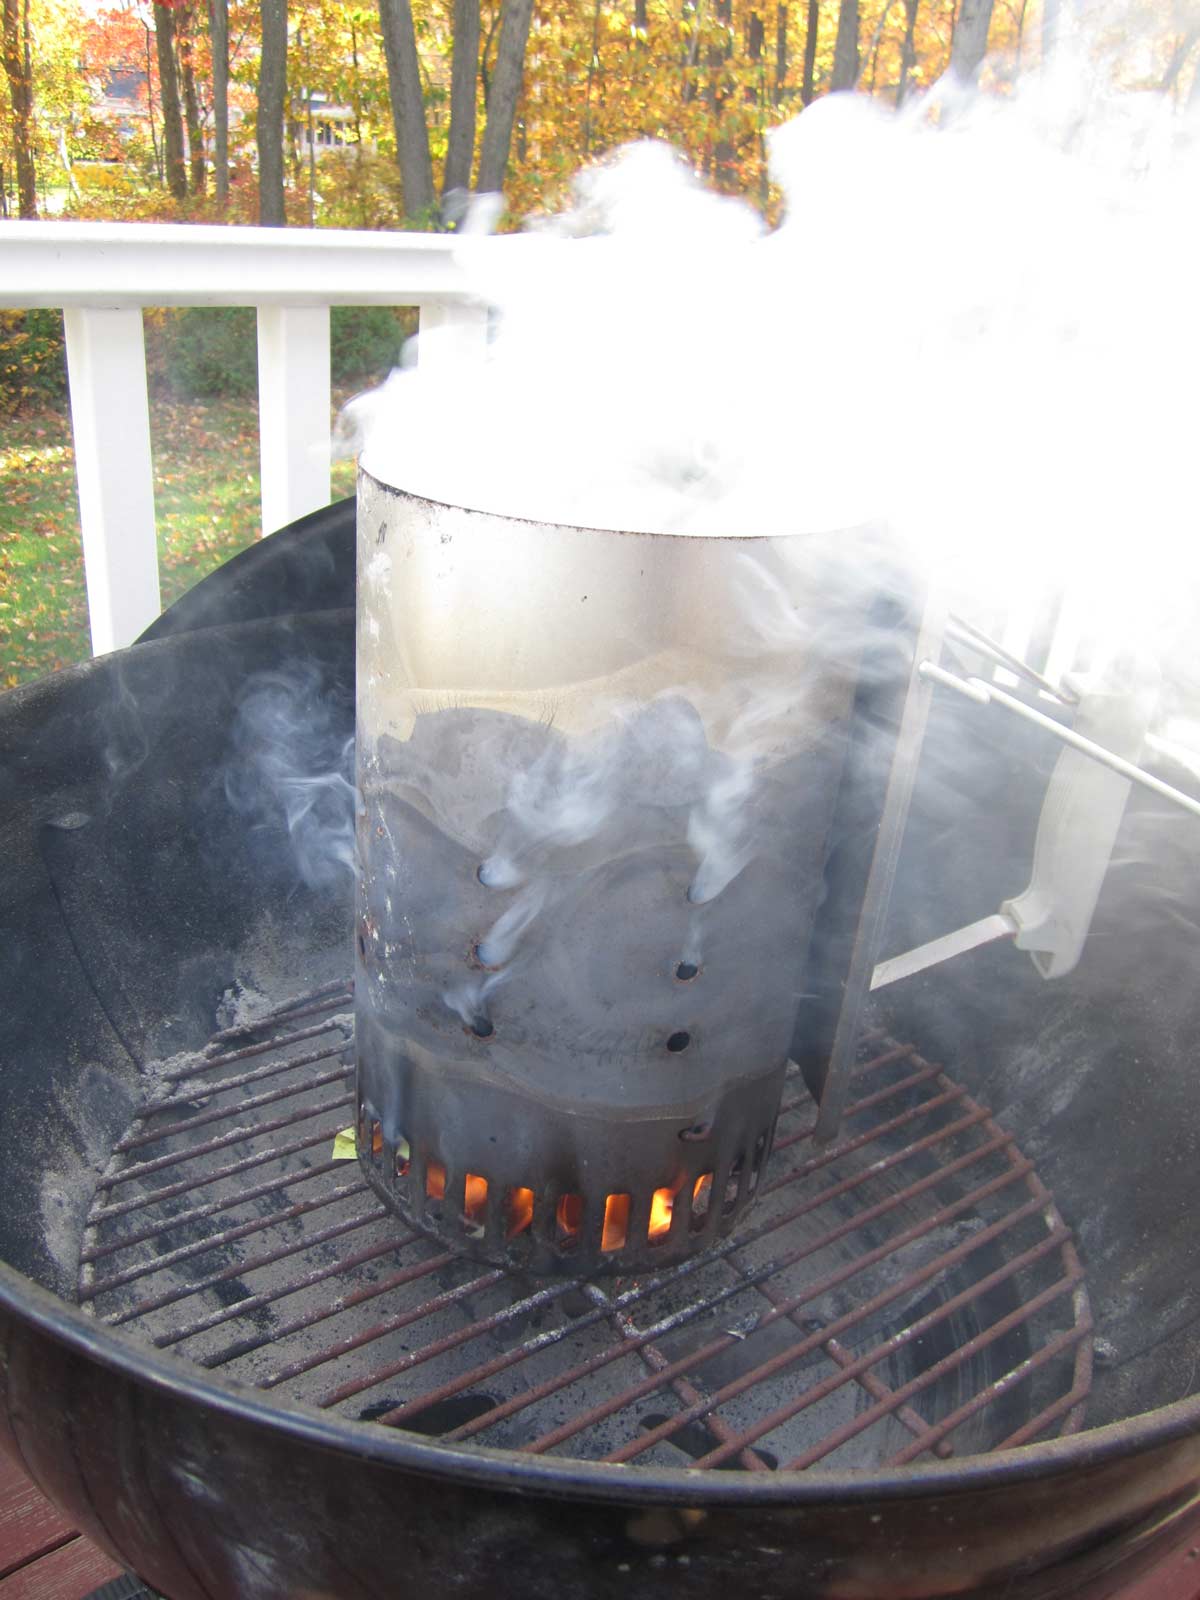 A chimney starter on a charcoal grill with smoke coming out of it.